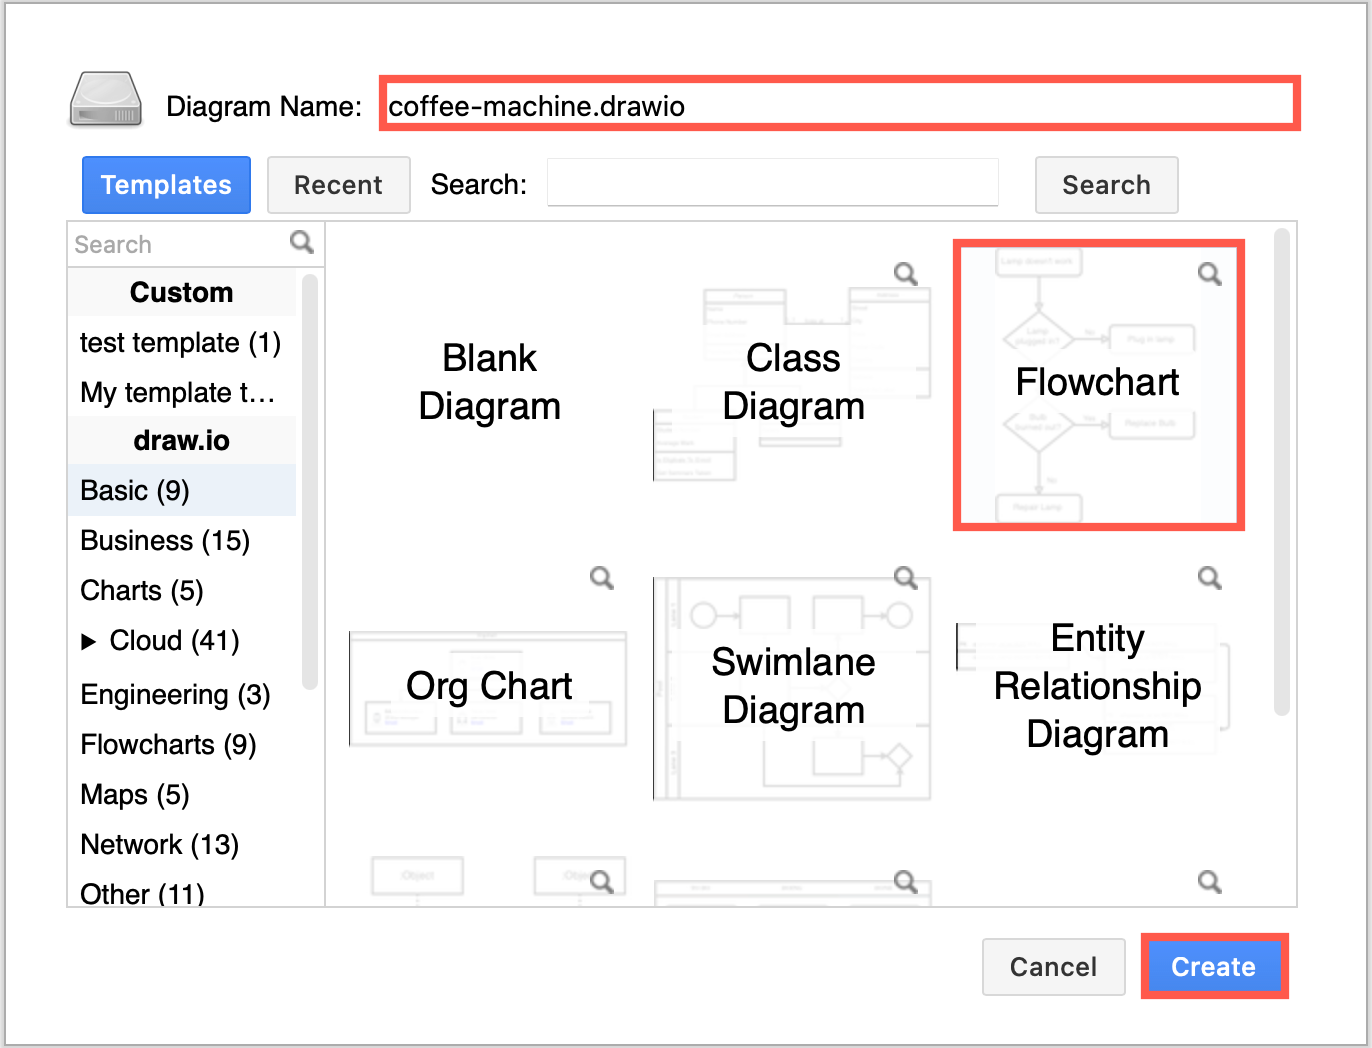 Select a template diagram, then click Create to insert a diagram into Confluence Cloud